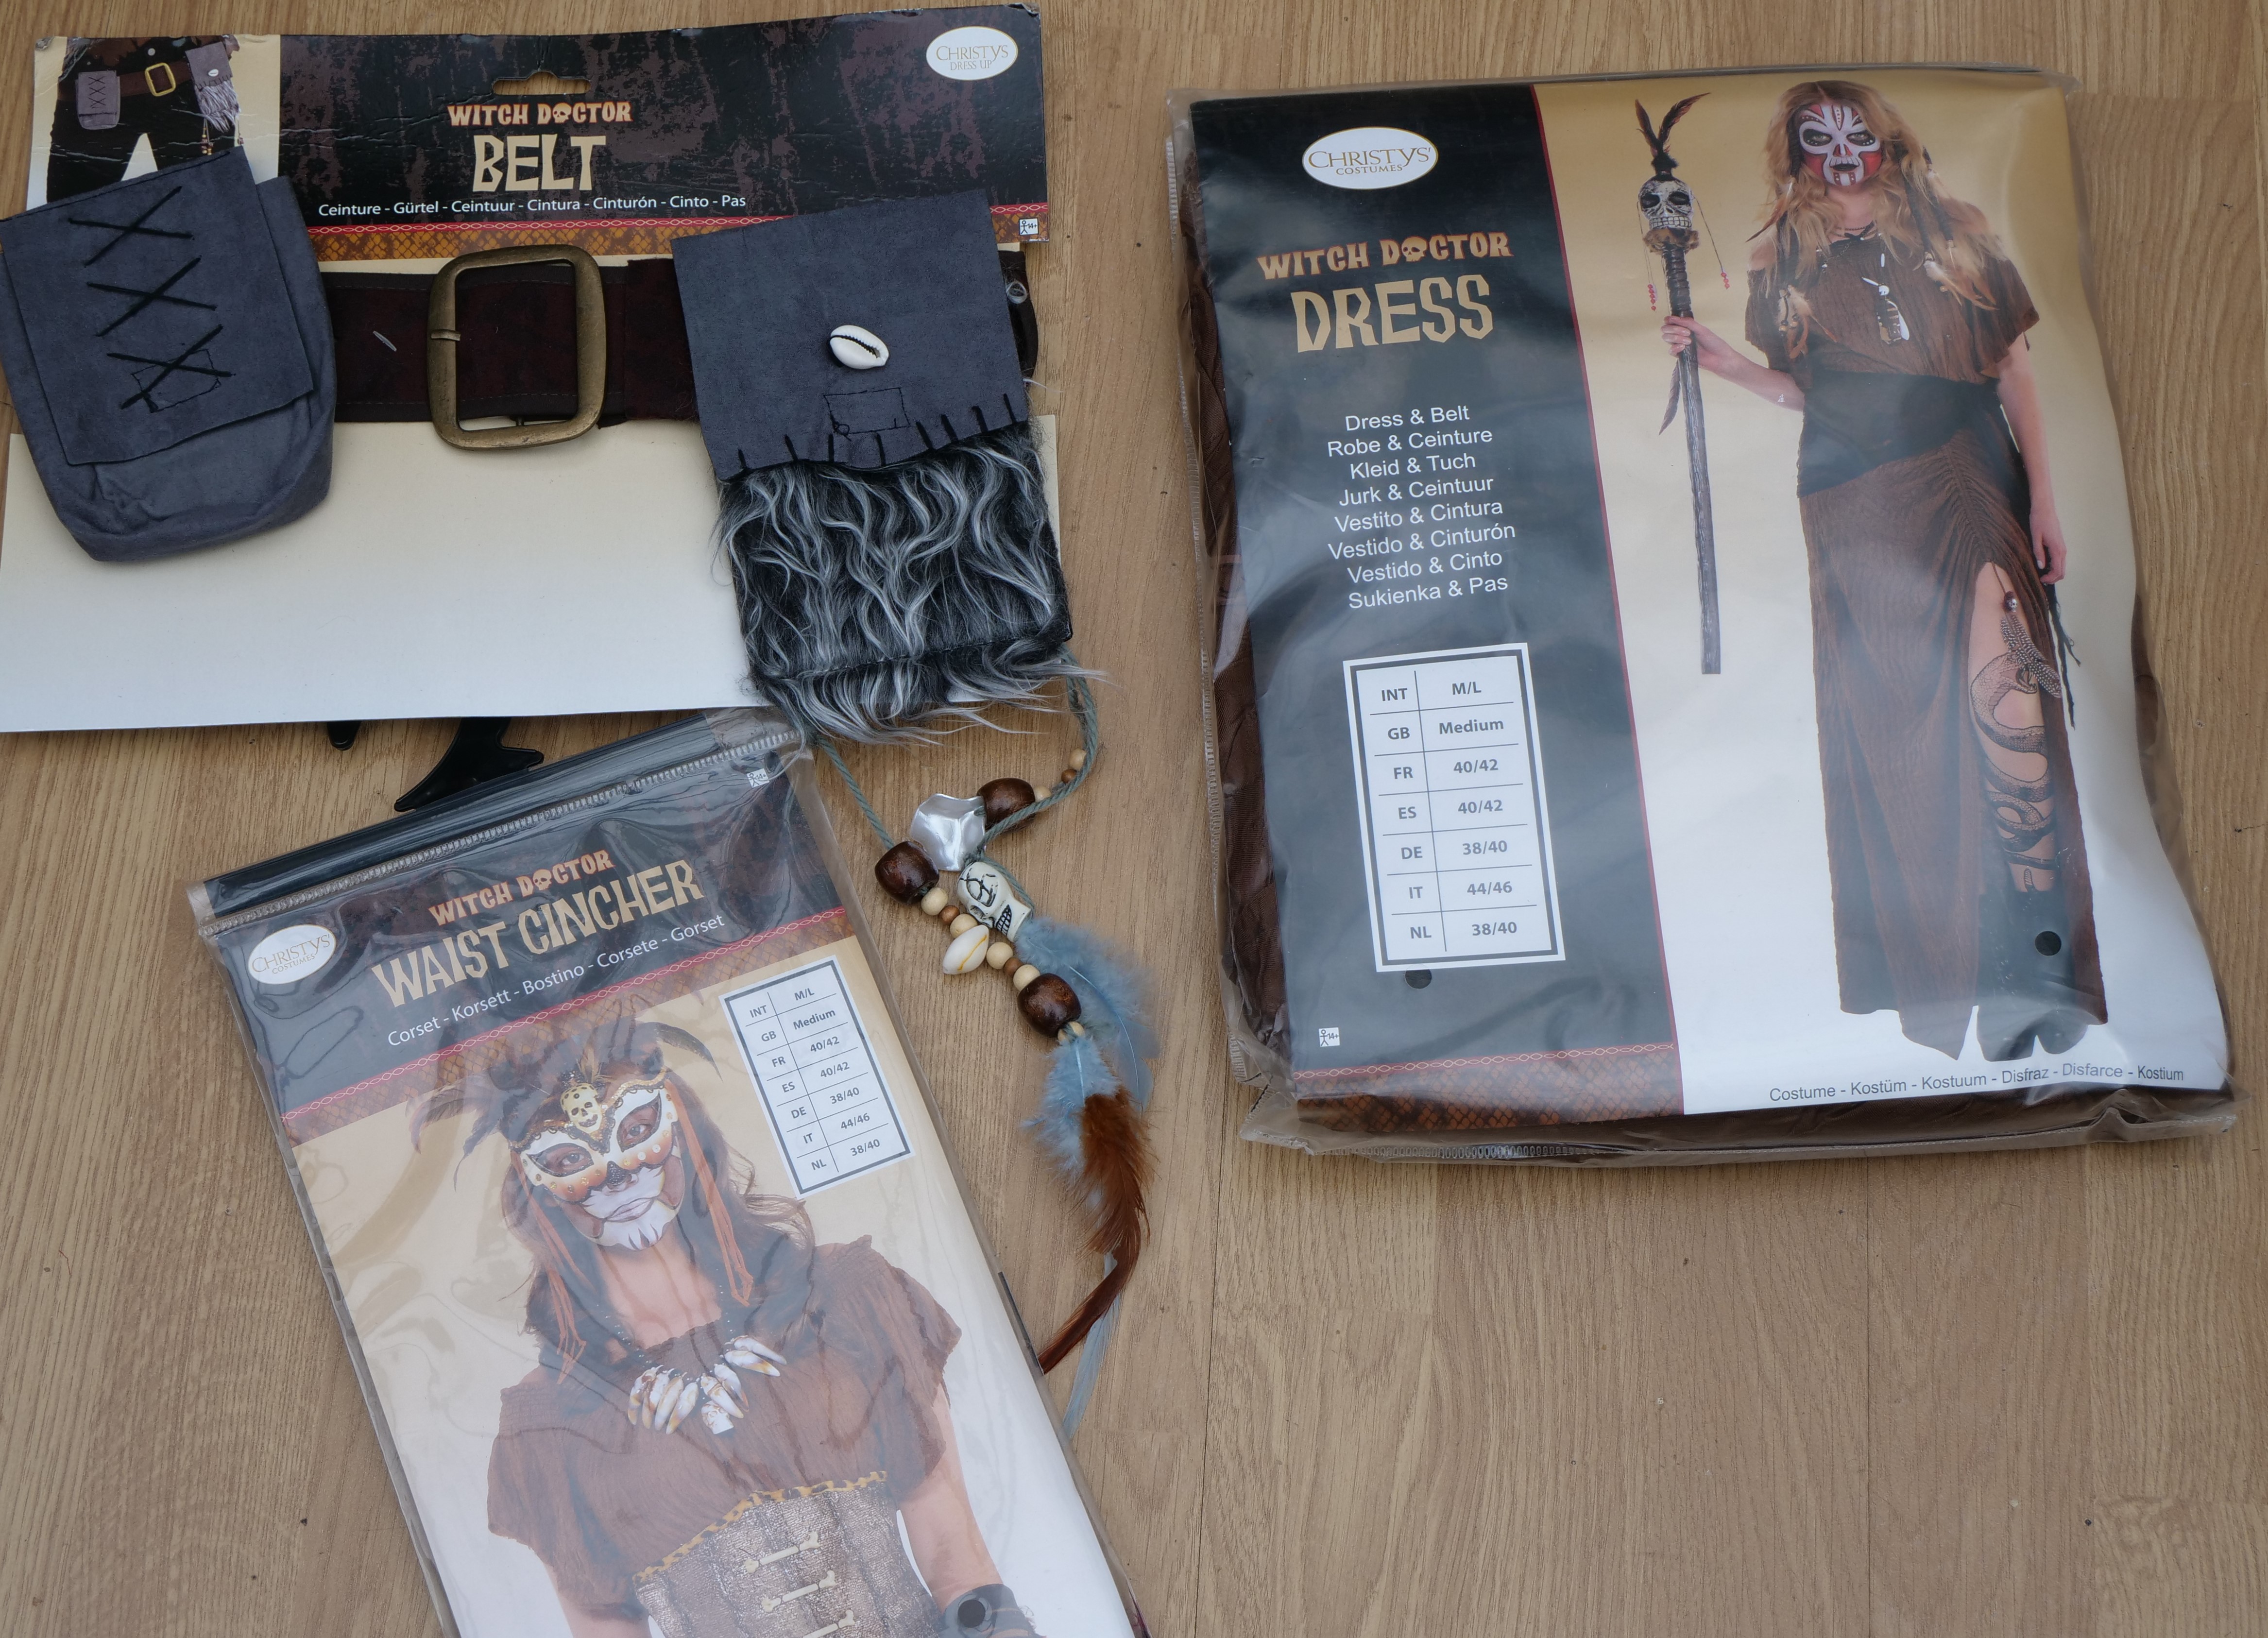 35 Witch Doctor Outfits and Accessories Anscan RRP £725.65